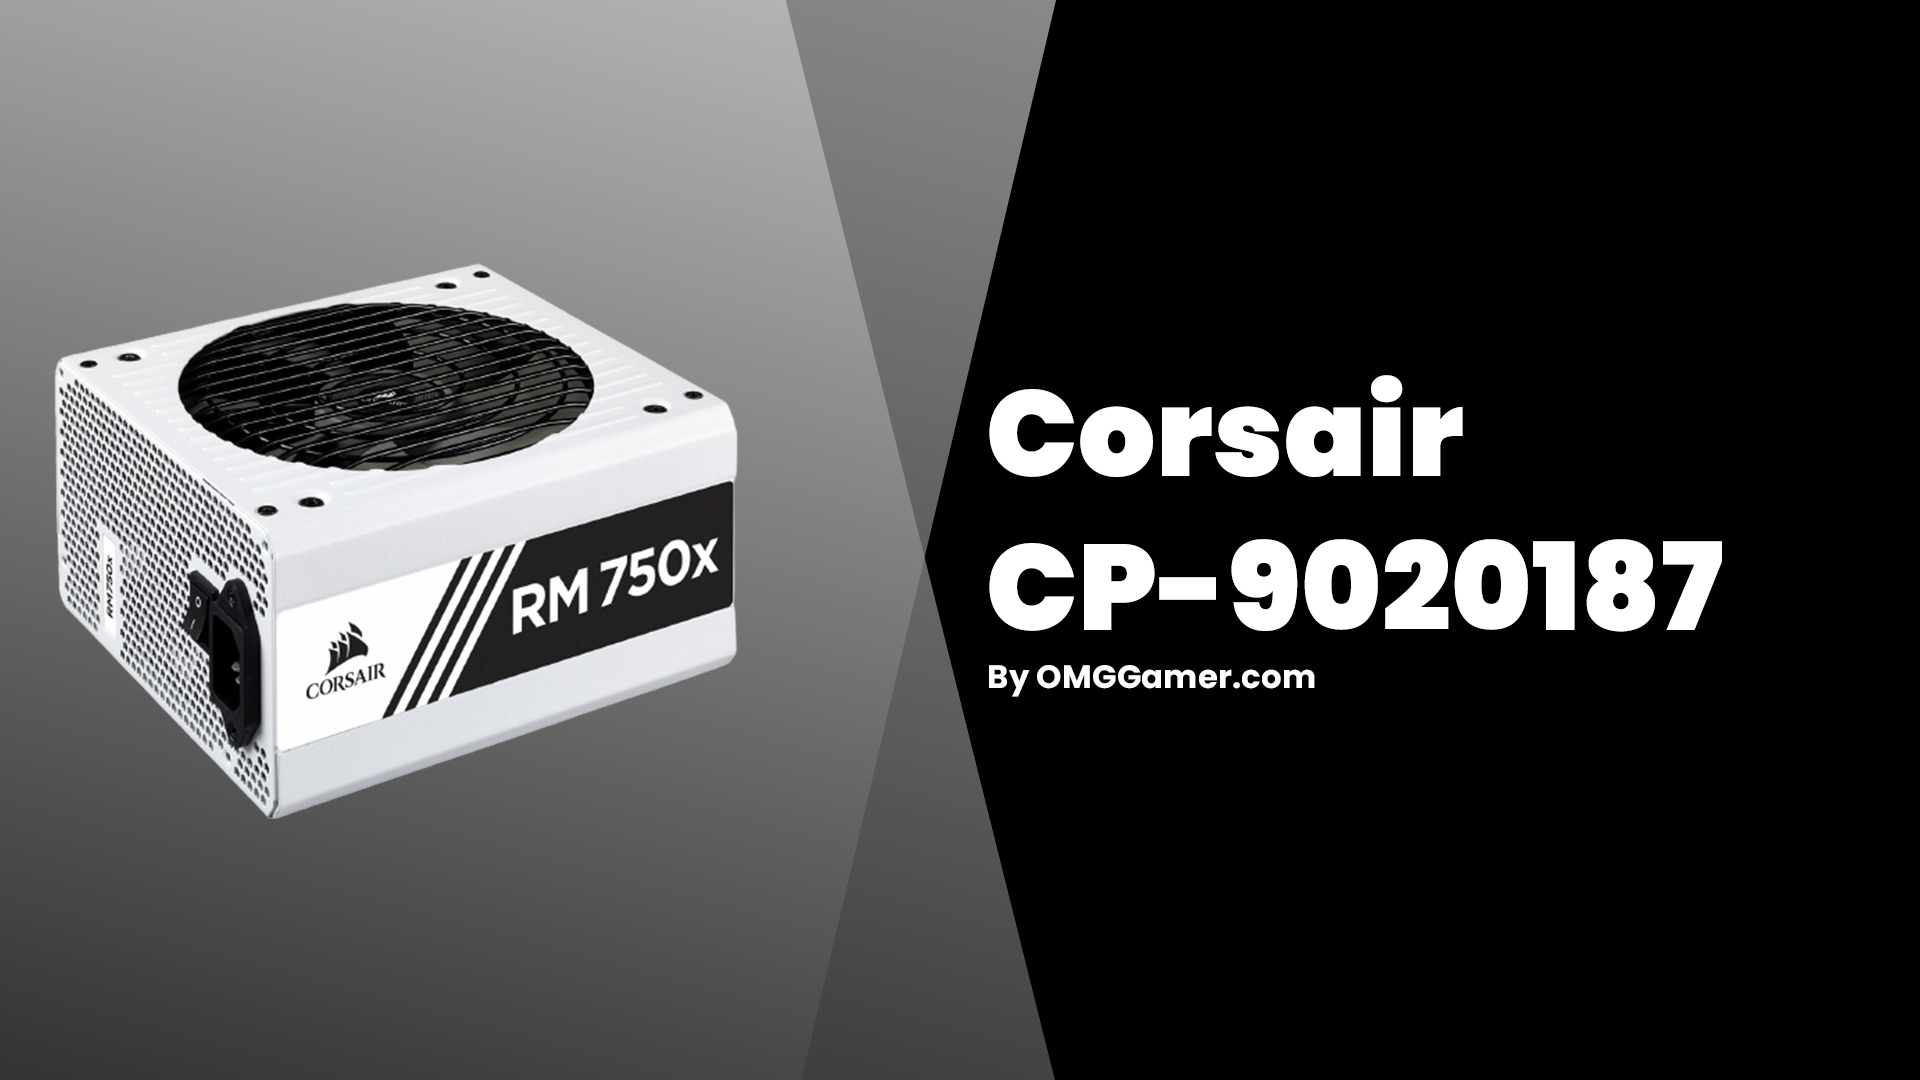 Corsair CP-9020187: White Power Supply for Gaming PC